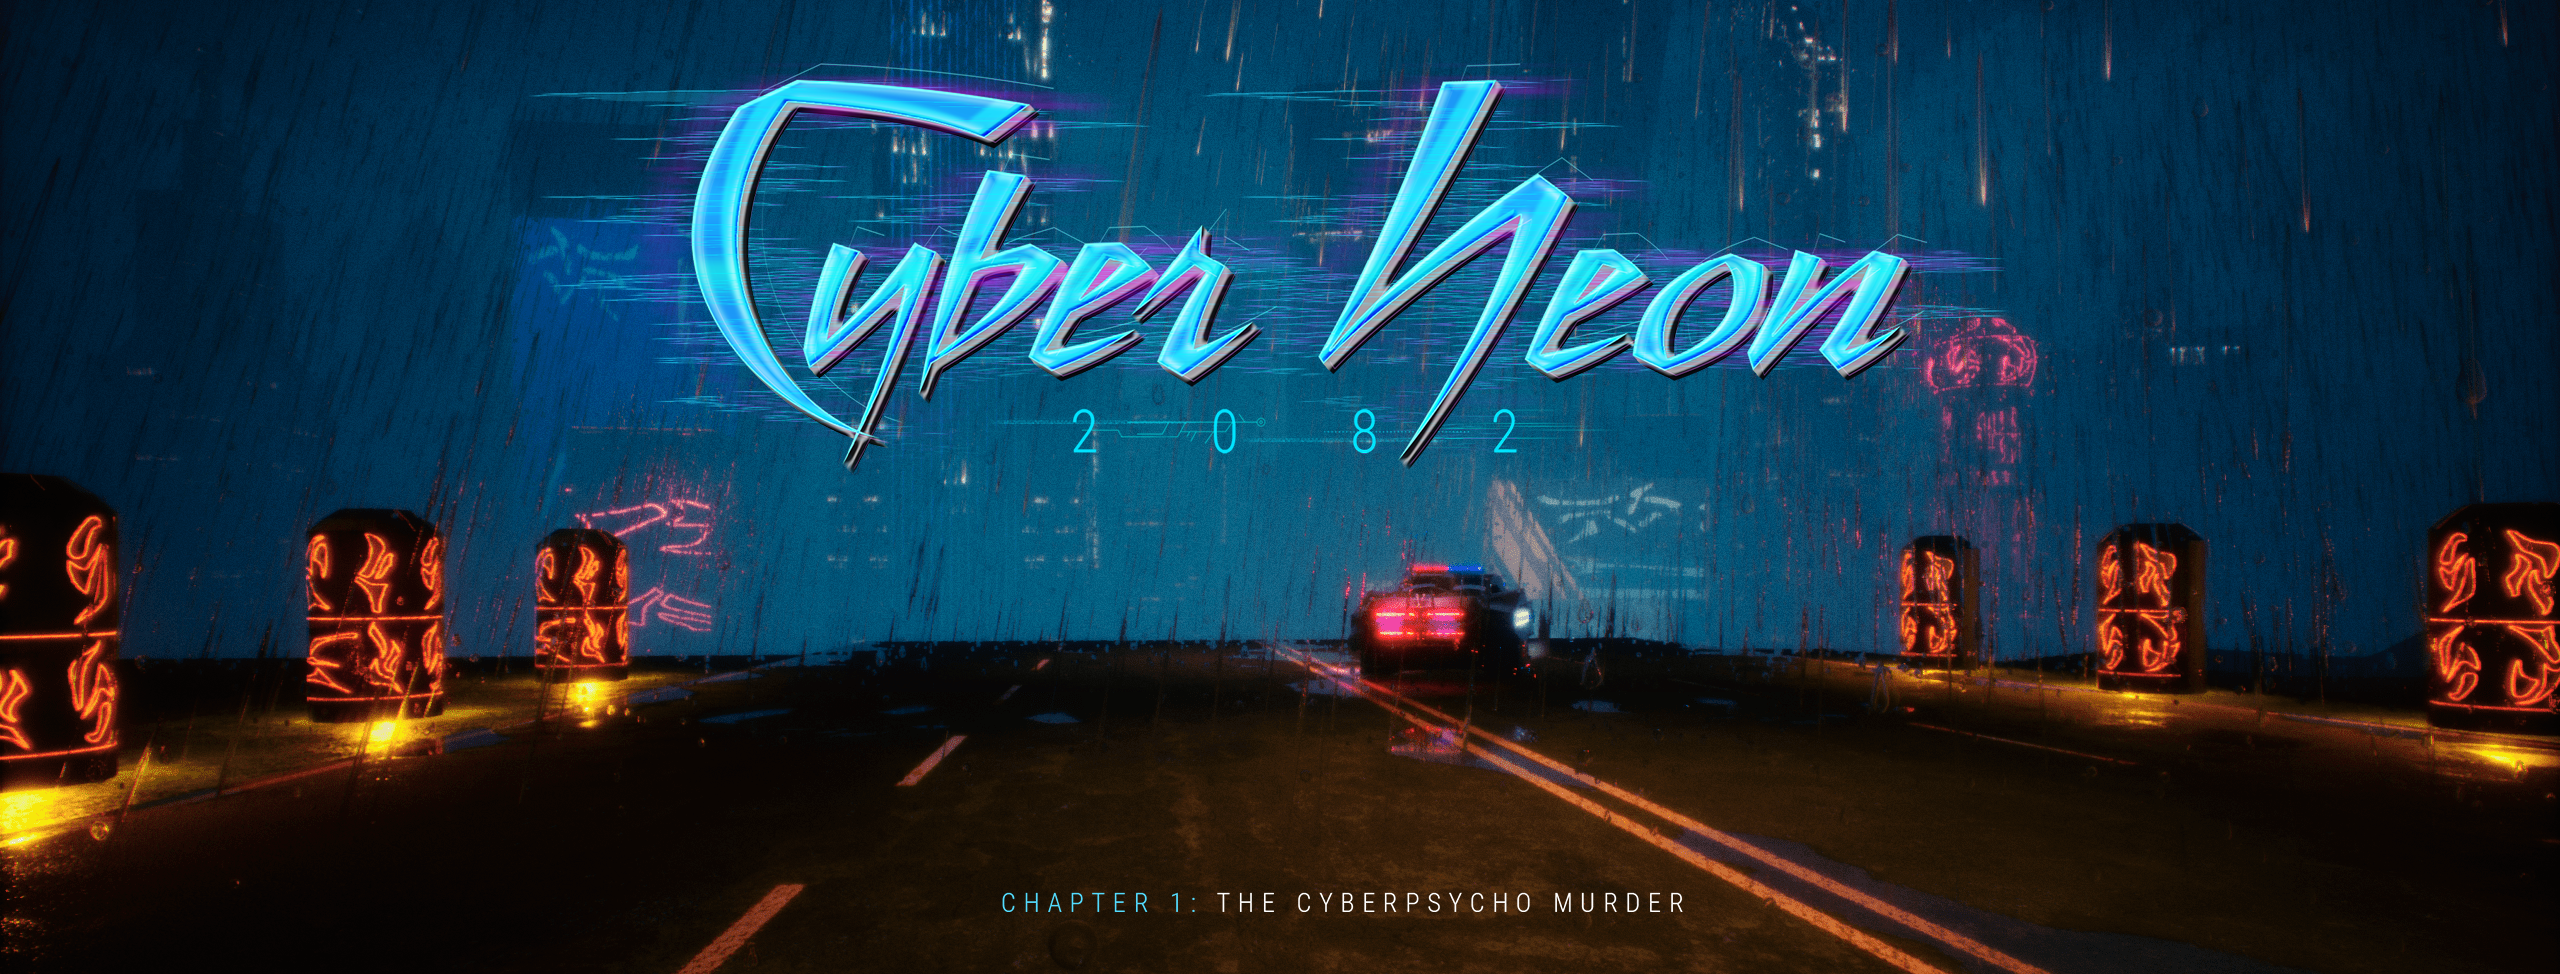 CyberNeon 2082 – Chapter 1: The CyberPsycho Murder